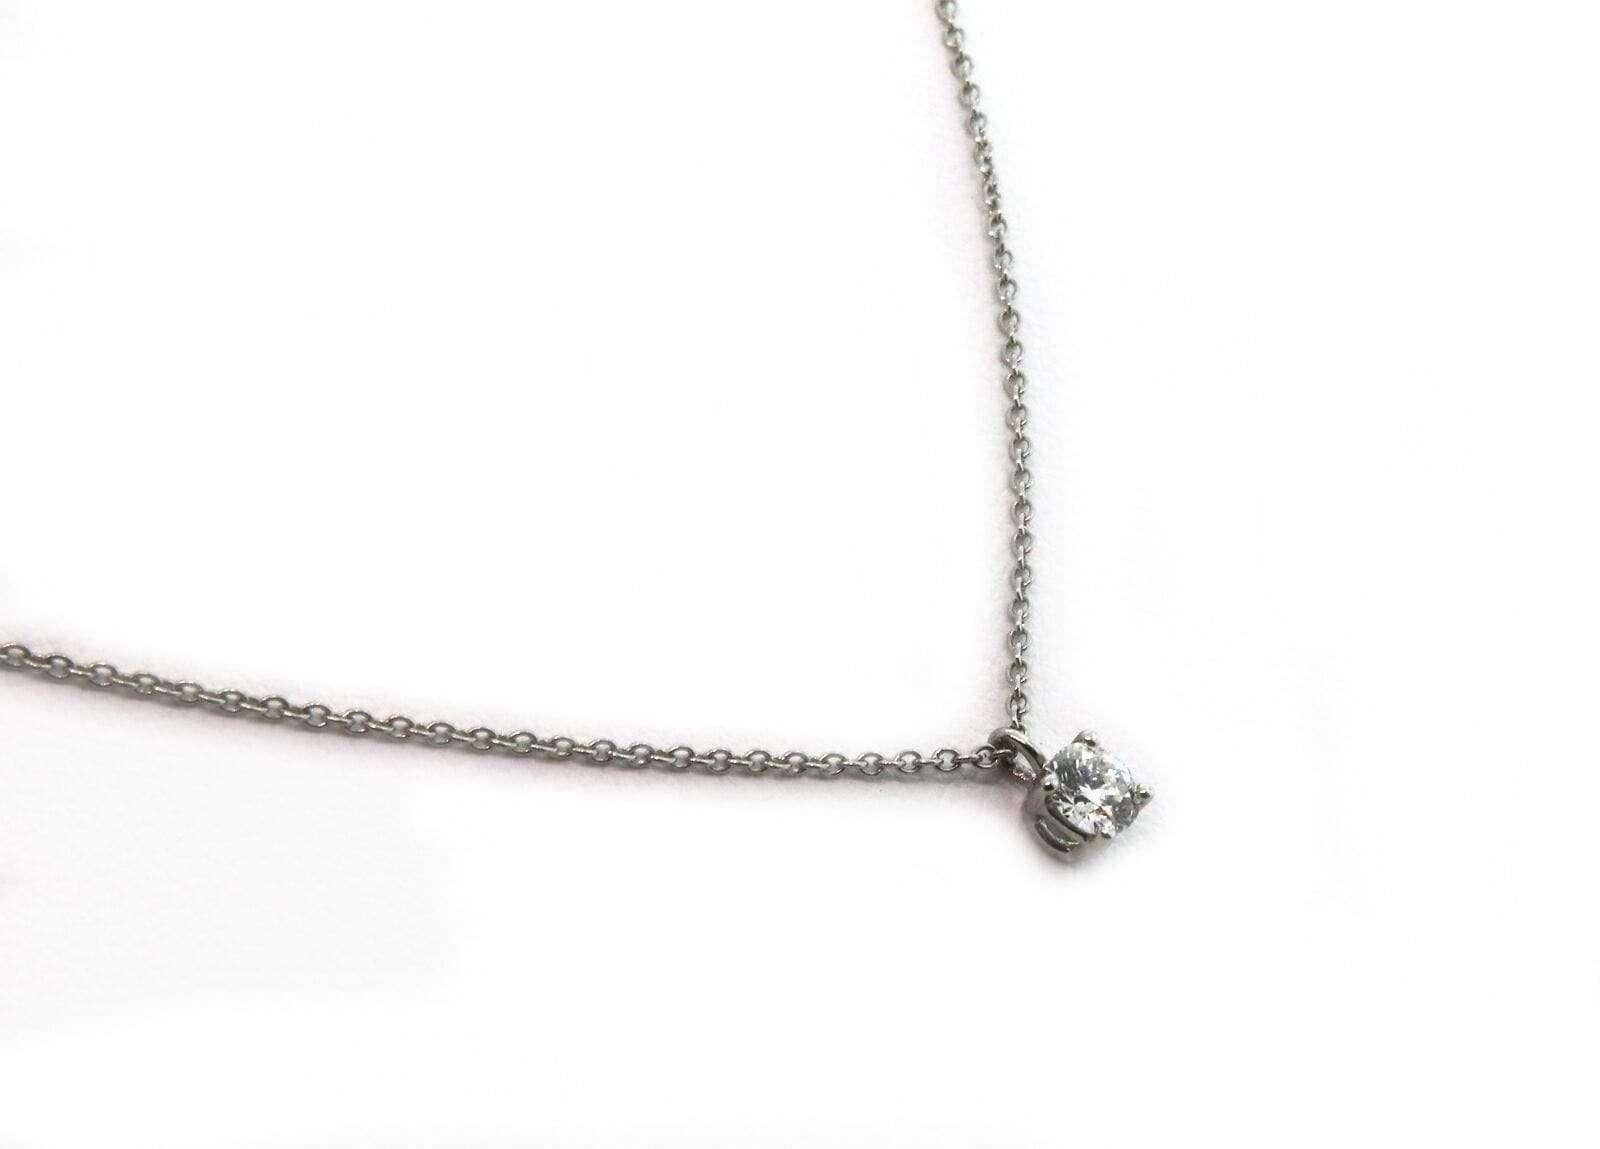 Tiffany & Co Diamond Solitaire Pendant Necklace in Platinum

Tiffany & Co Diamond Necklace
PT950 Platinum
Diamond Weight: approx. 0.25 CT
Chain Length: 16.0 Inches
Weight: approx. 2.8 Grams
Stamped: T&CO, PT950

Offered for your consideration is a